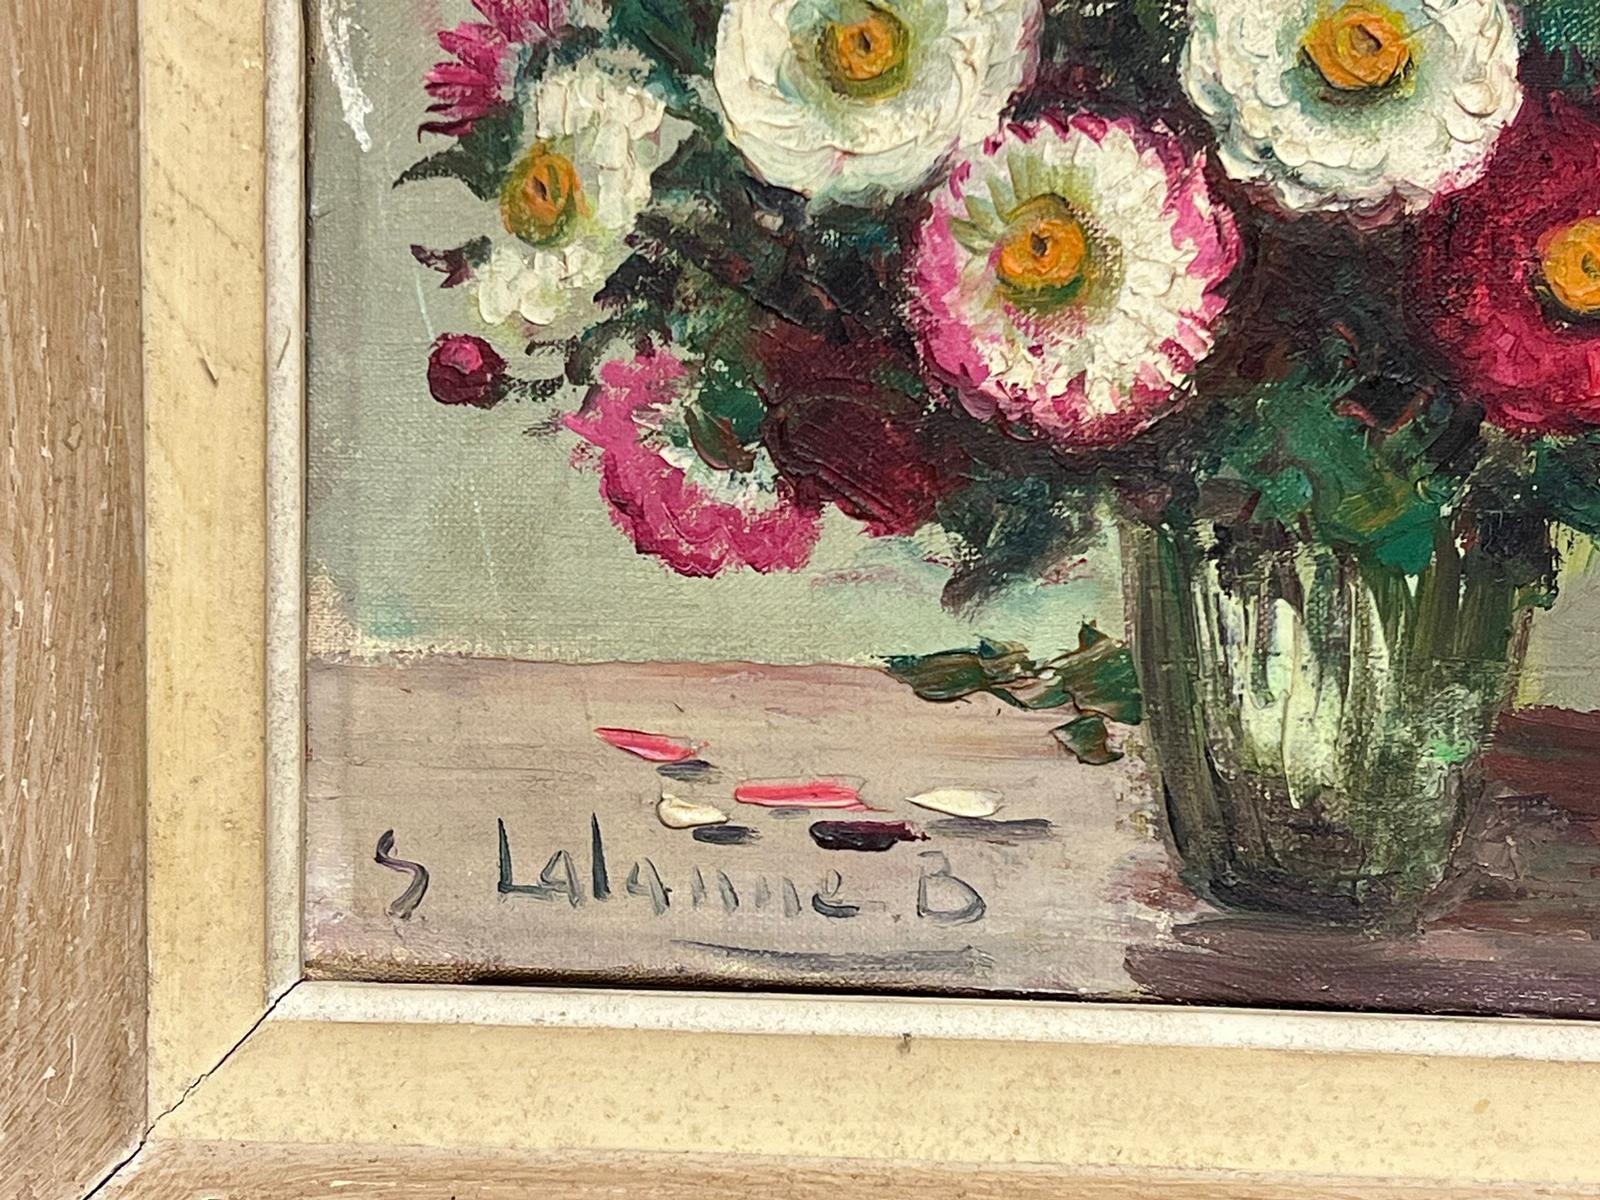 Vintage Still Life of Flowers
French School, mid 20th century
signed oil on canvas, framed
framed: 14.5 x 16.5 inches
canvas: 9 x 11 inches
provenance: private collection, France
condition: very good and sound condition